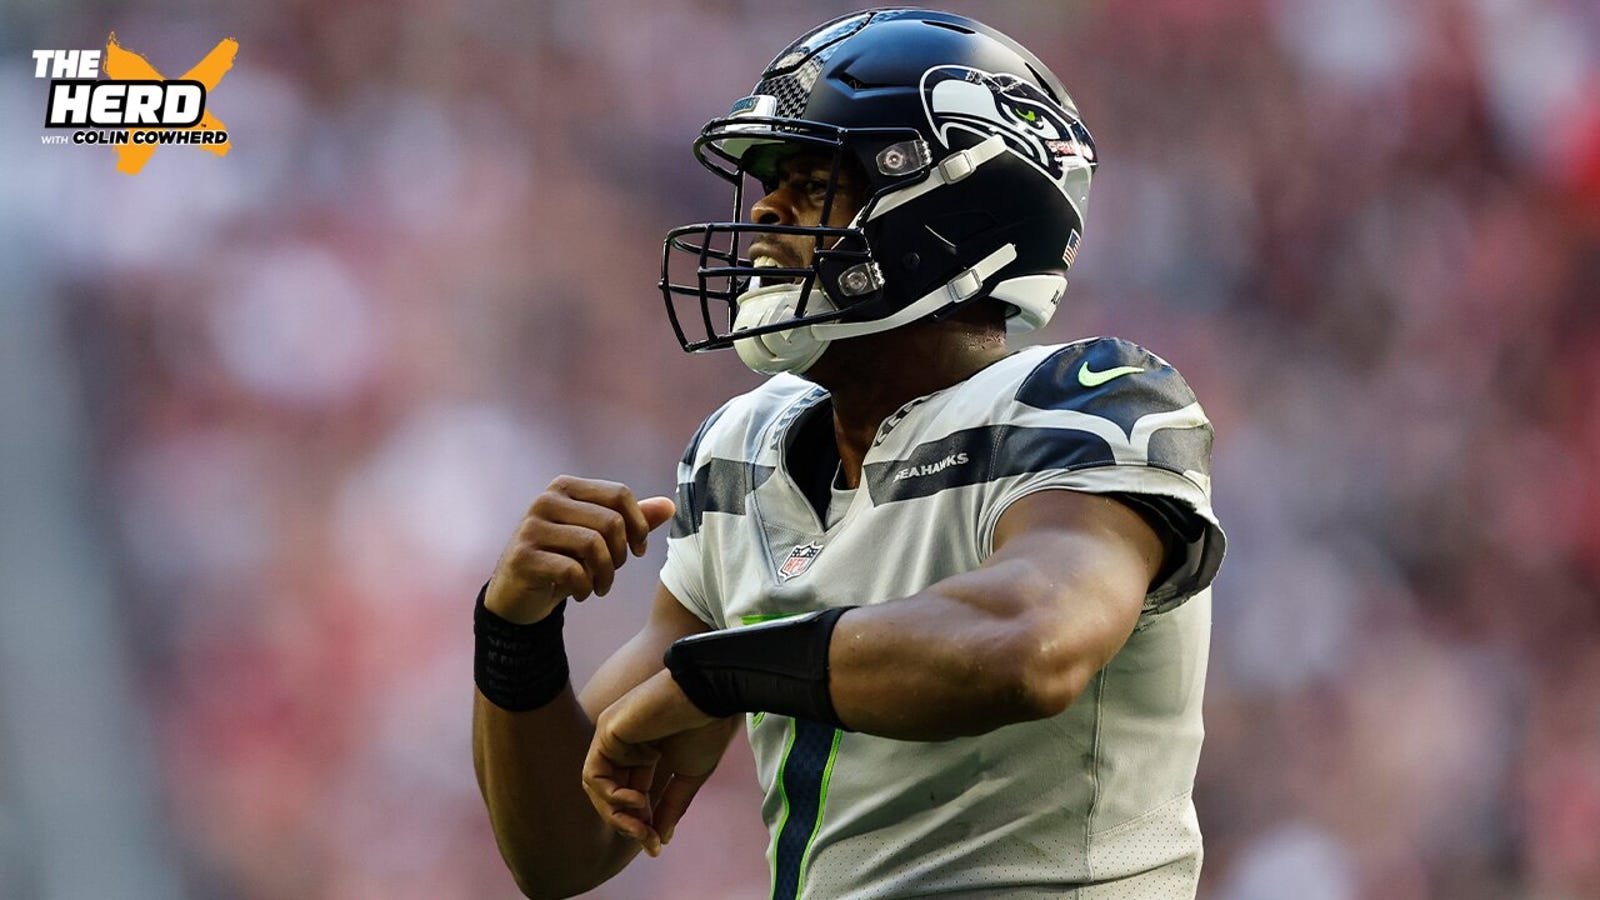 What makes Geno Smith, Seahawks successful